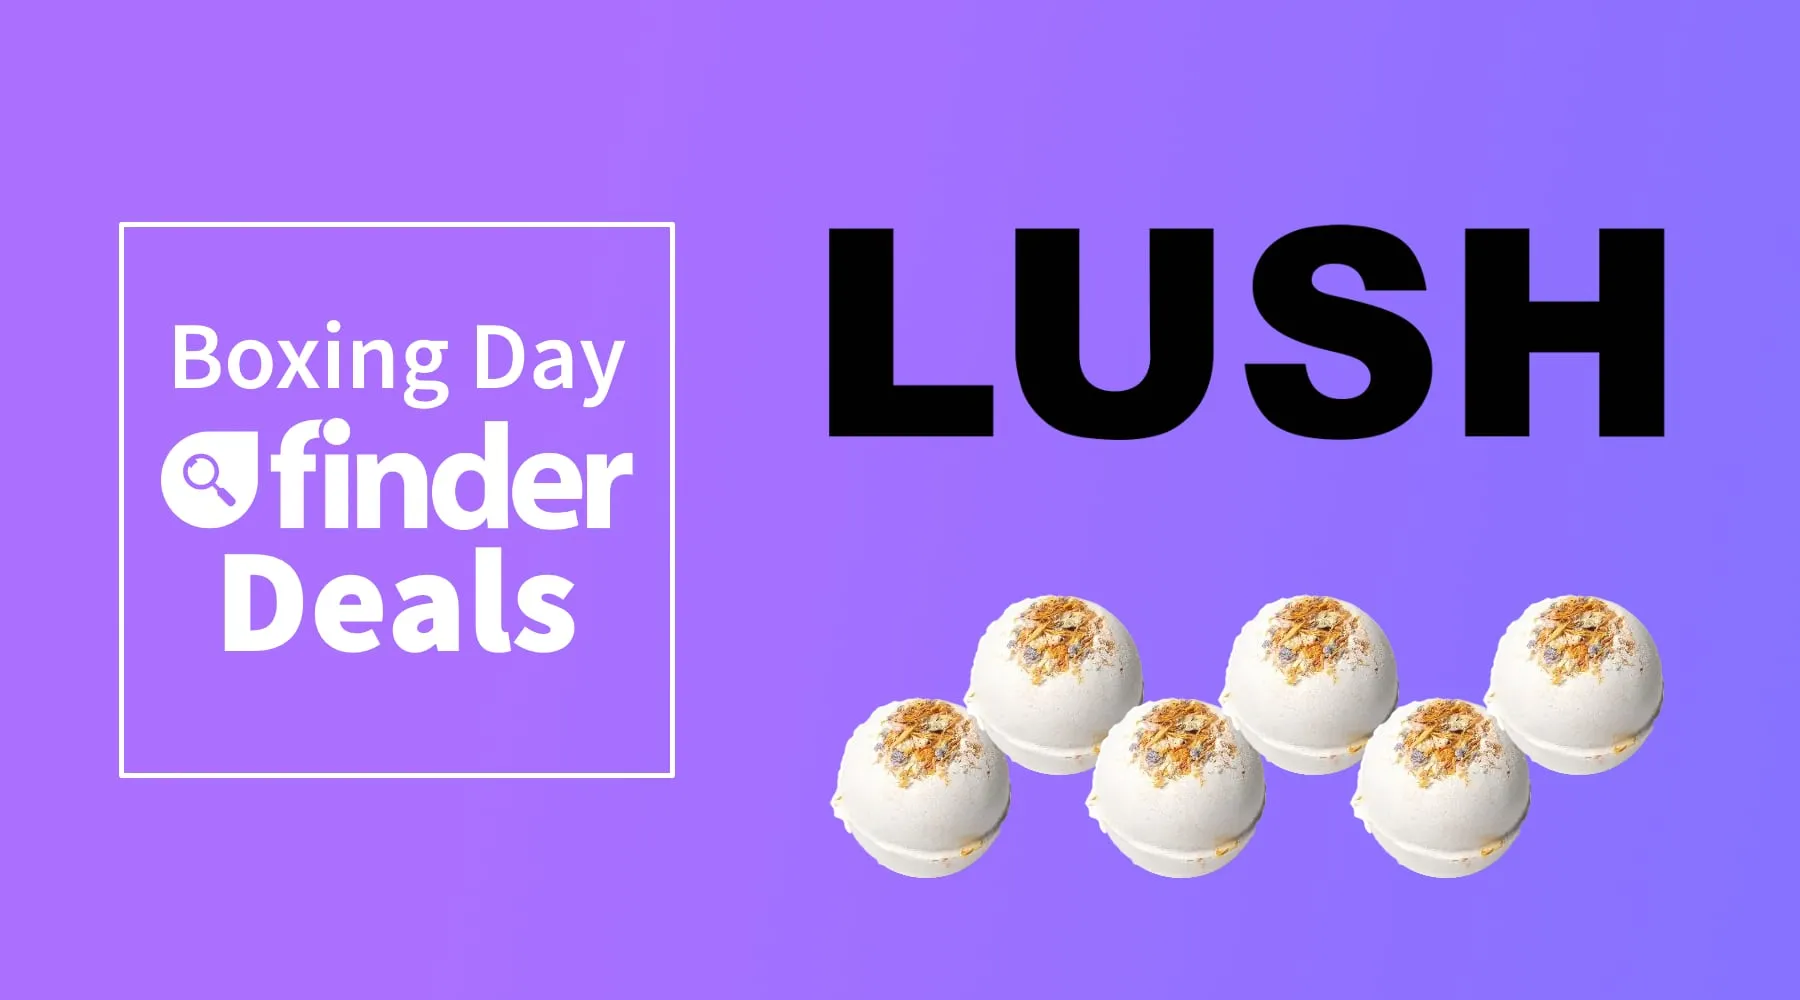 The best Boxing Day 2020 deals on now at LUSH